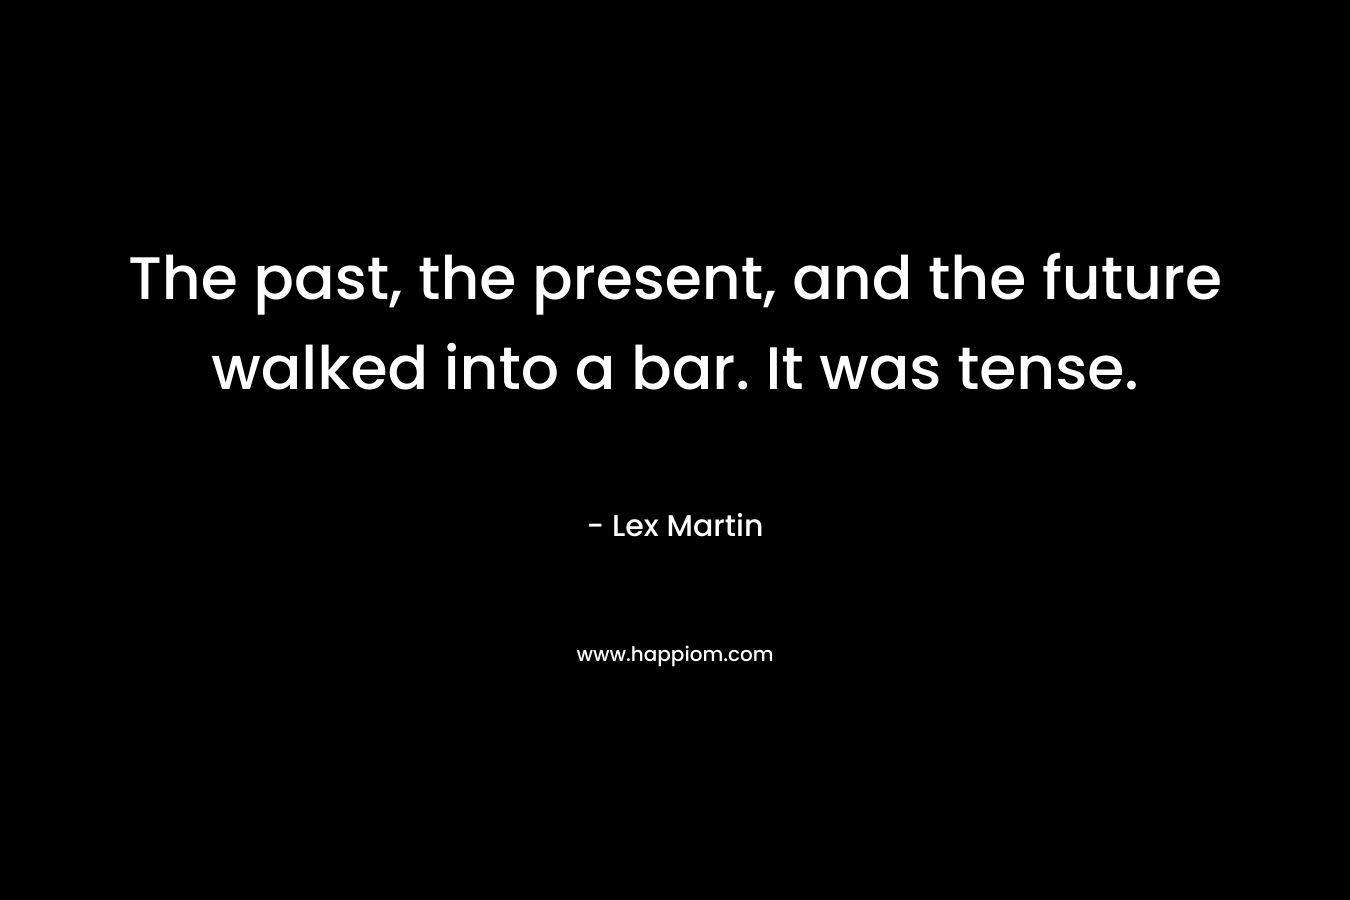 The past, the present, and the future walked into a bar. It was tense. – Lex Martin